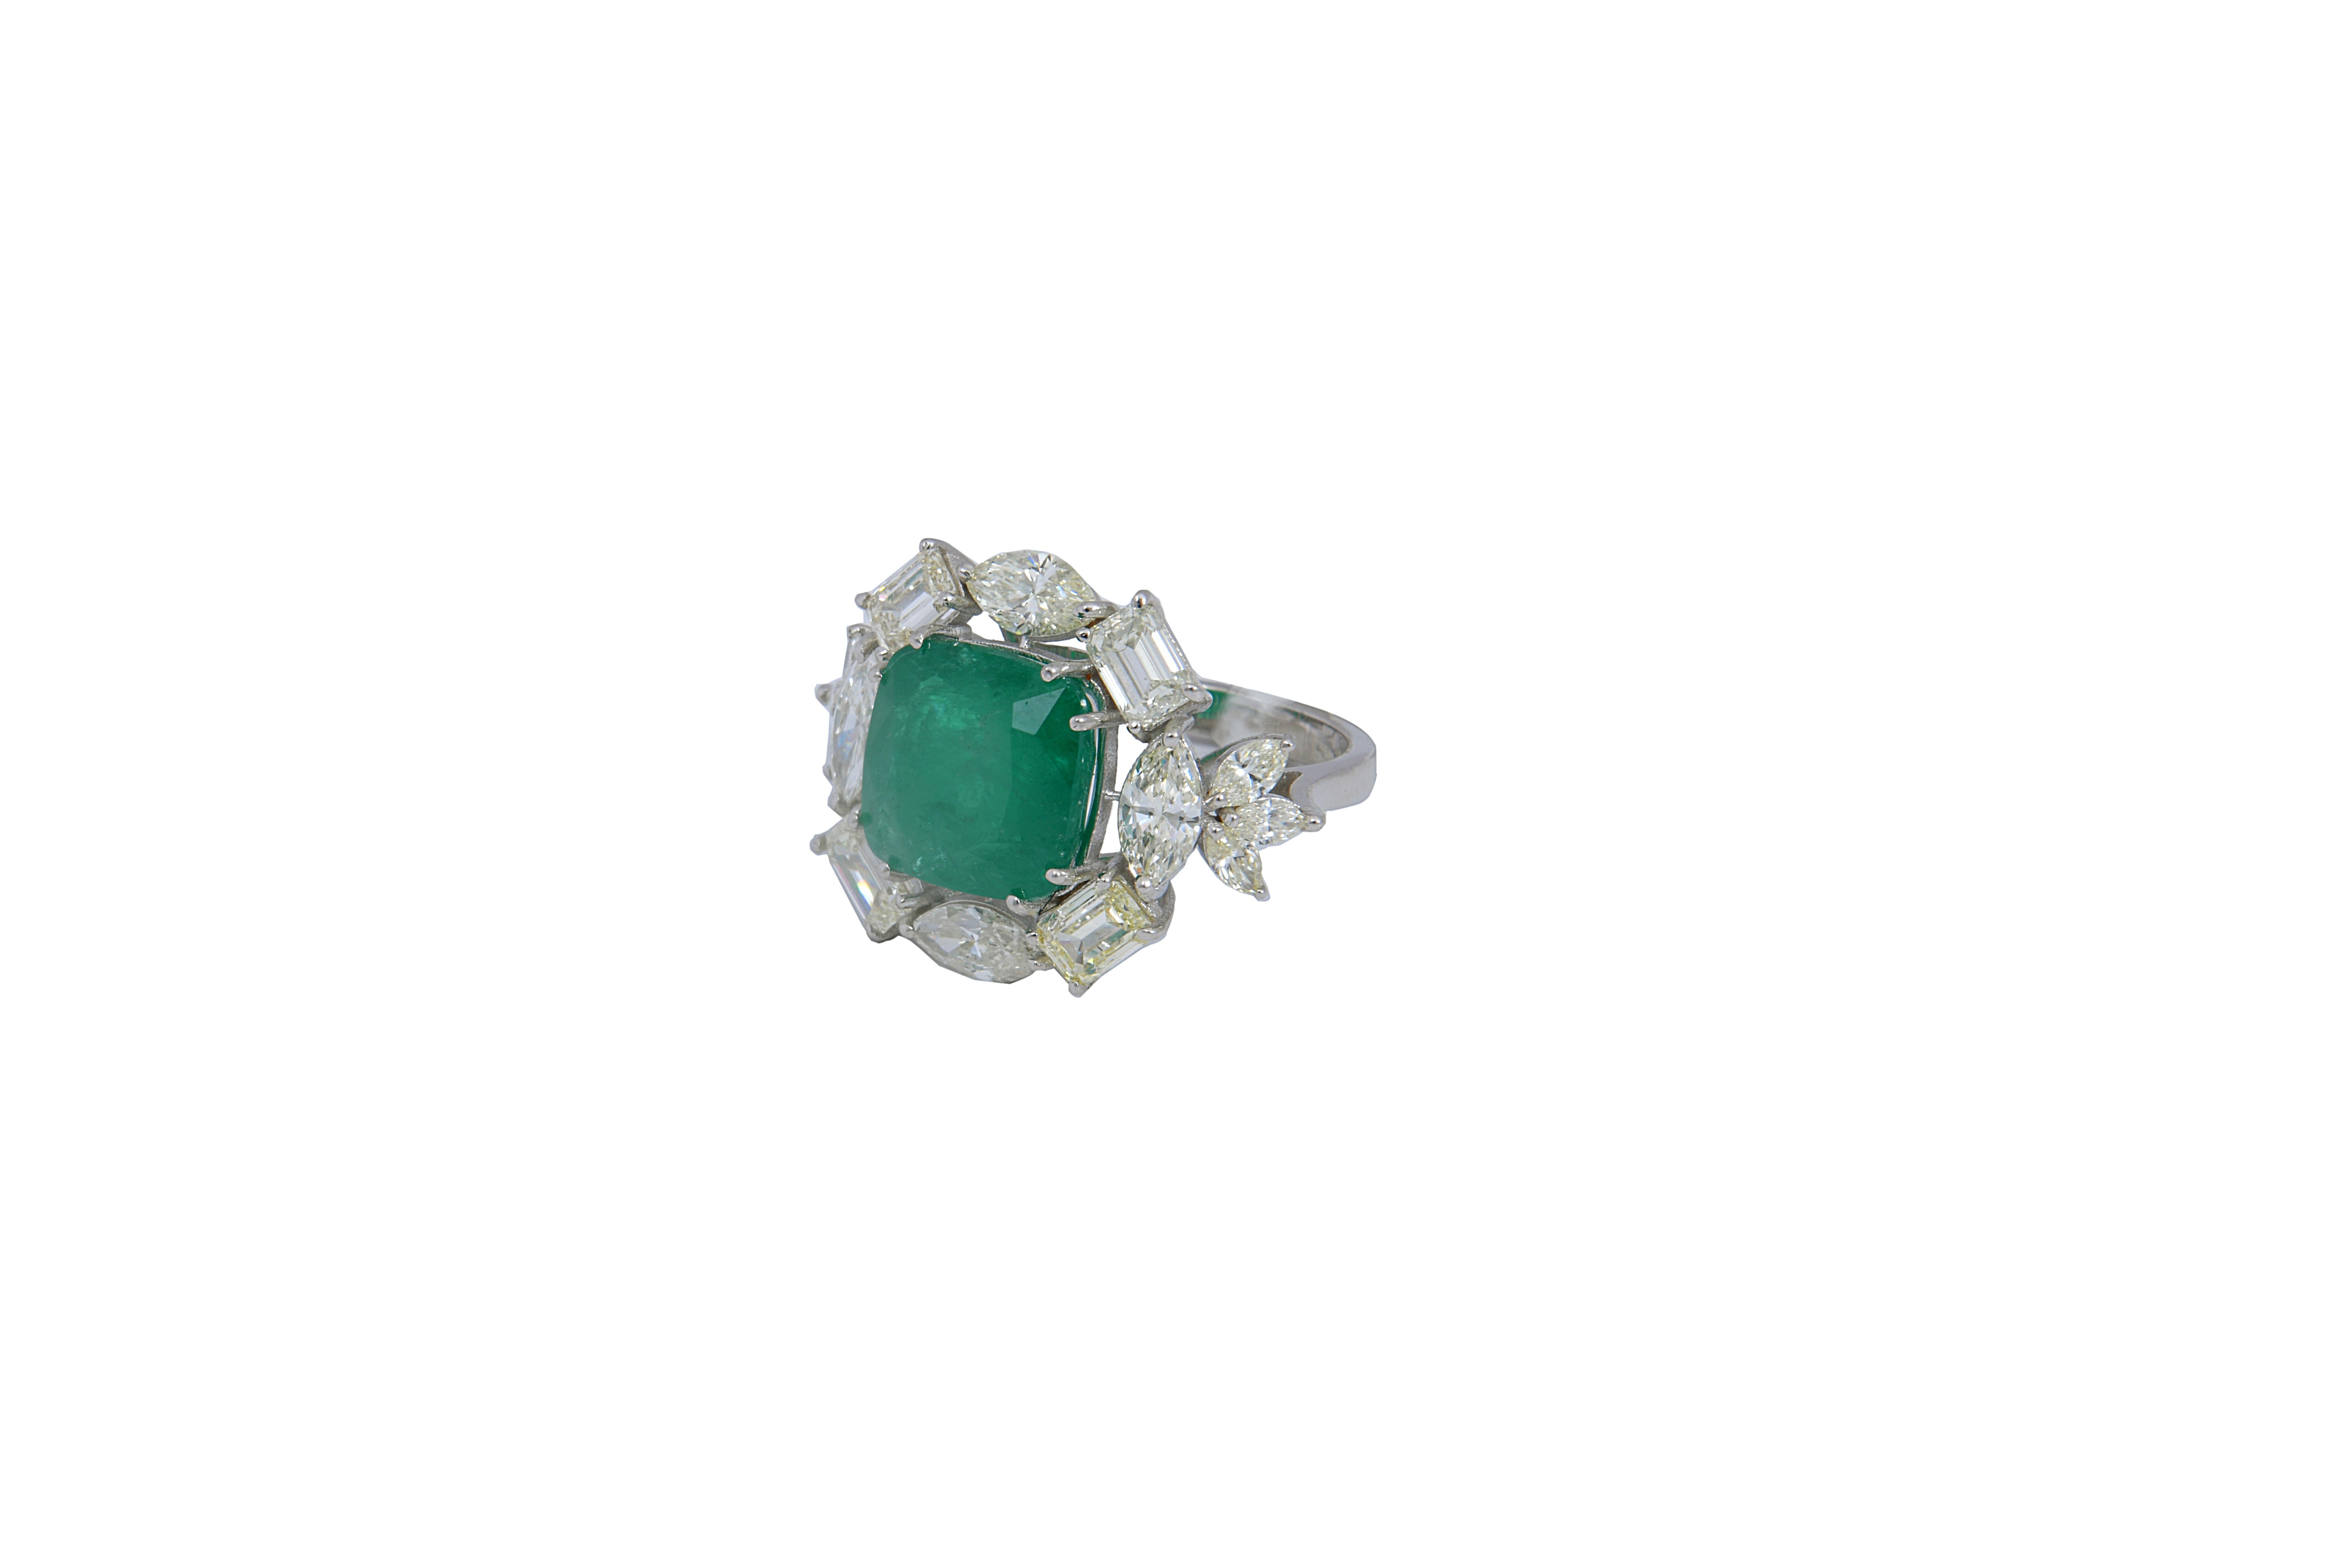 Women's Natural Diamond Ring with 4.88 Carat Diamond 7.57 Carat Emerald in 14k Gold For Sale